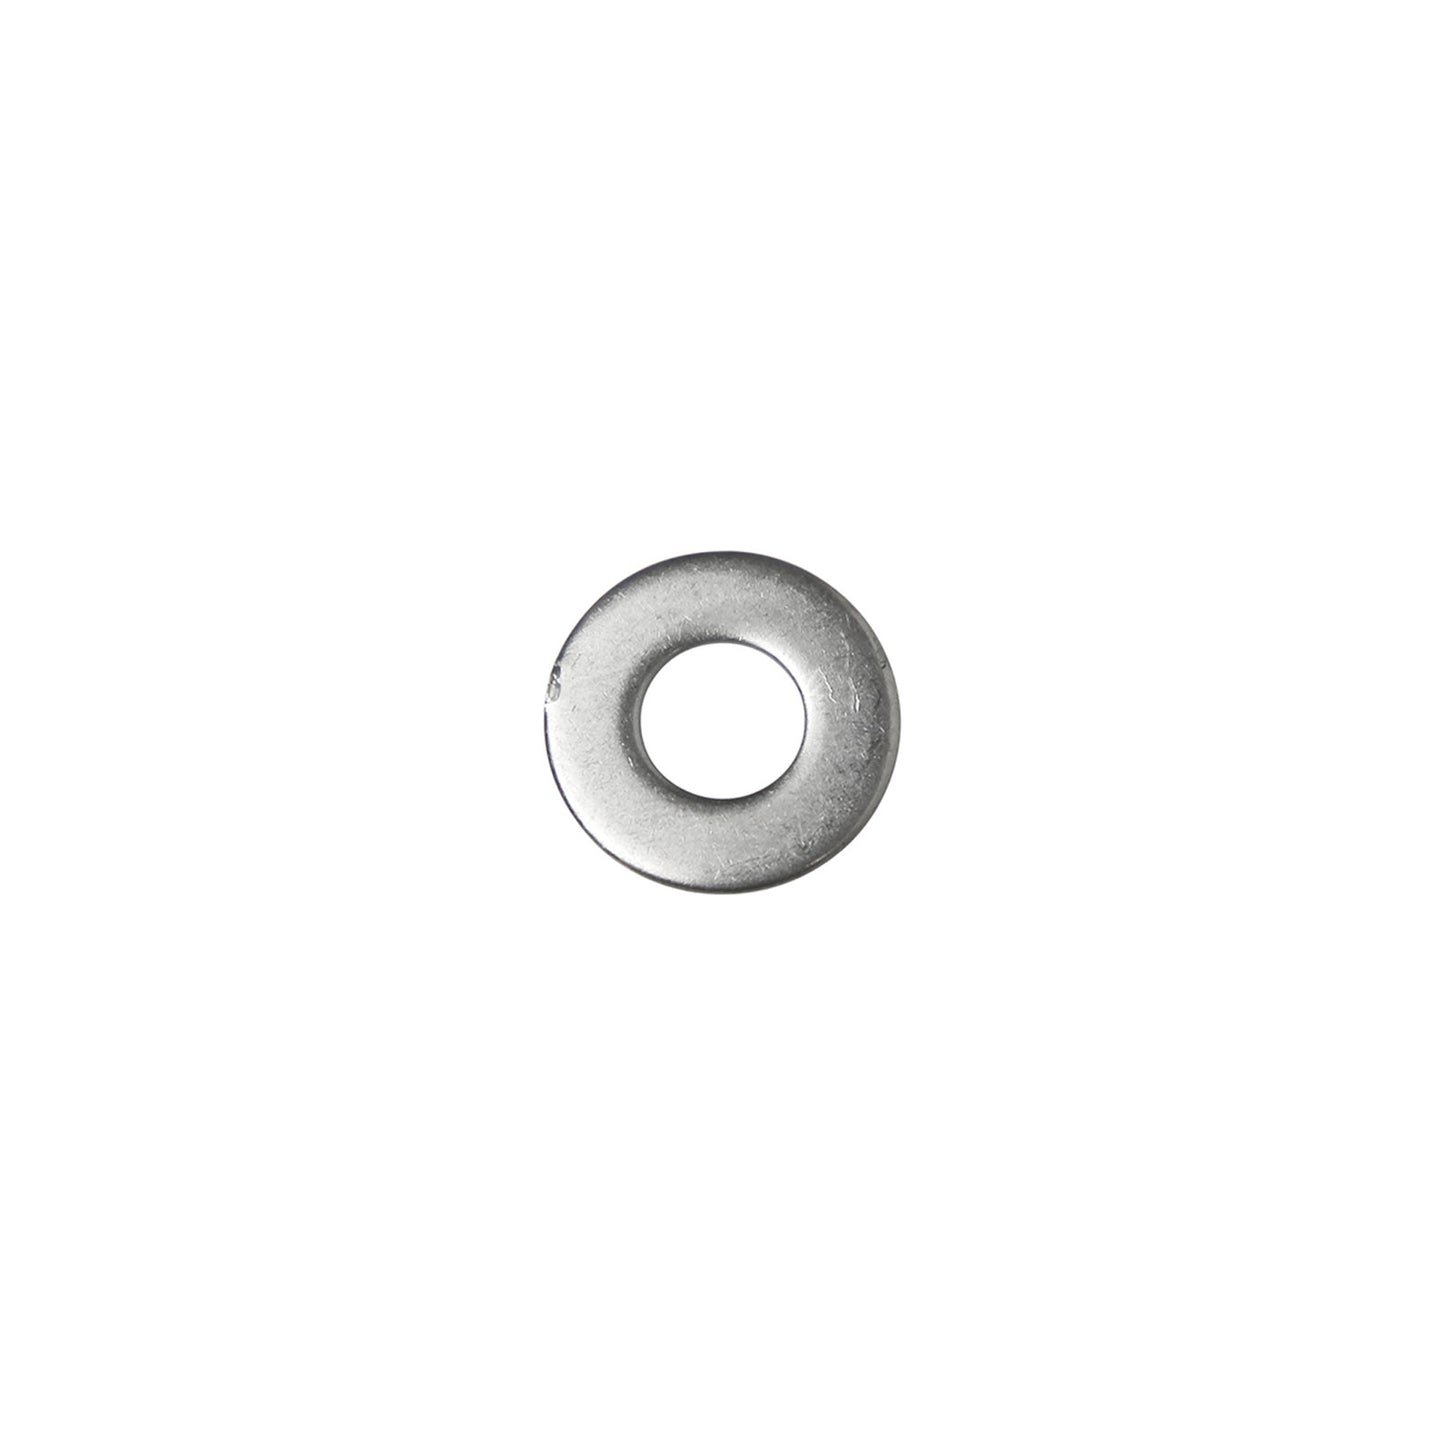 5/16" Conquest SAE Flat Washer - 304 Stainless Steel